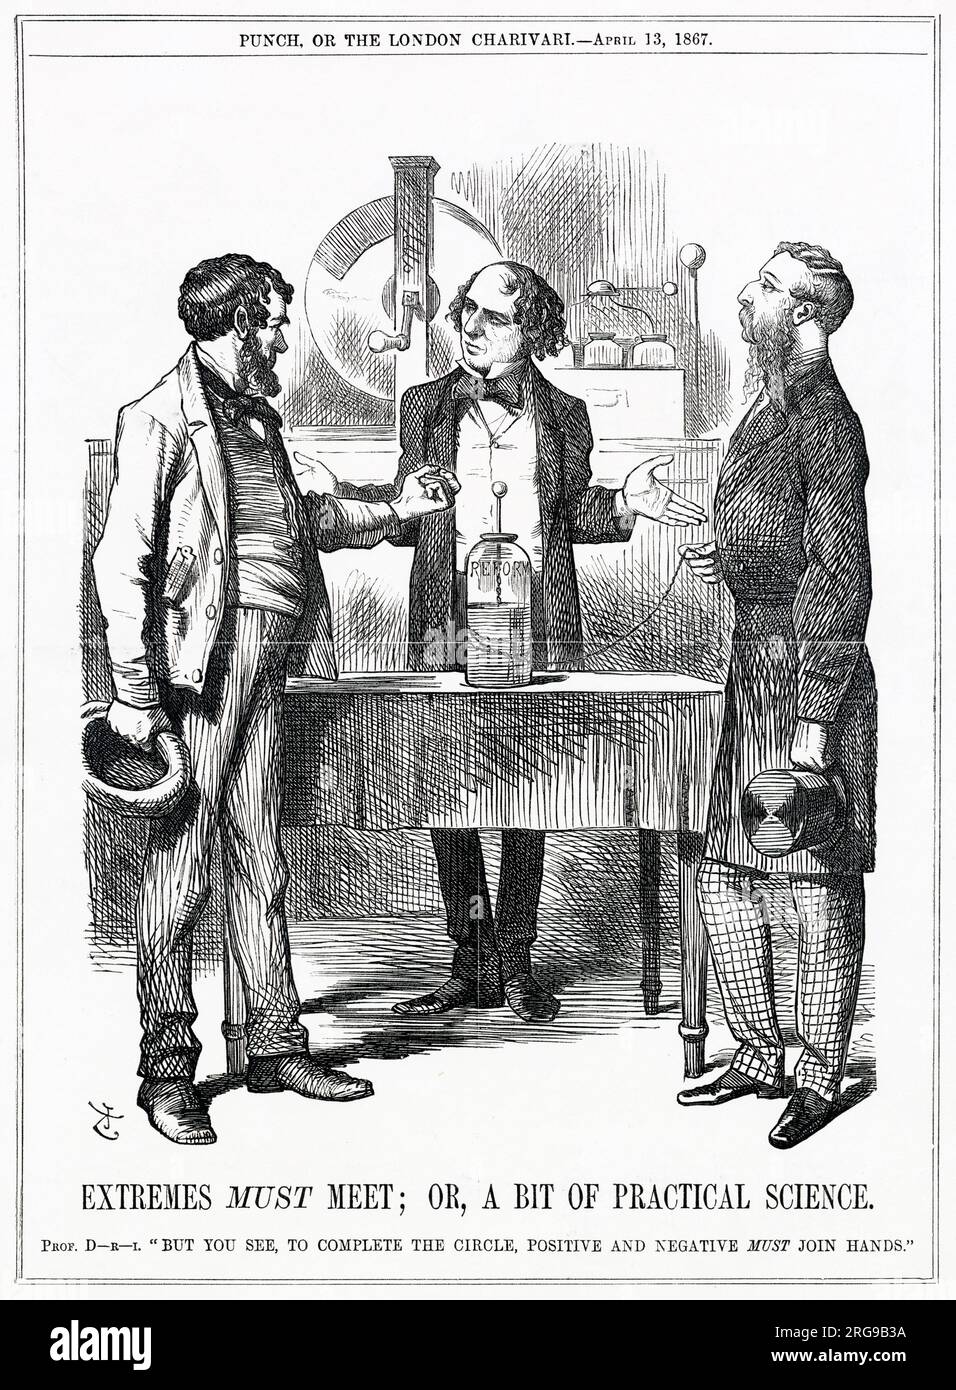 Cartoon, Extremes Must Meet; or, A Bit of Practical Science -- a satirical comment on Disraeli's Reform Bill, in which men can qualify for the vote if they are ratepayers, meaning that men of all classes can be included in the franchise. Depicting Disraeli as a scientist conducting an experiment, asking a working man and a higher-class man to shake hands. Stock Photo